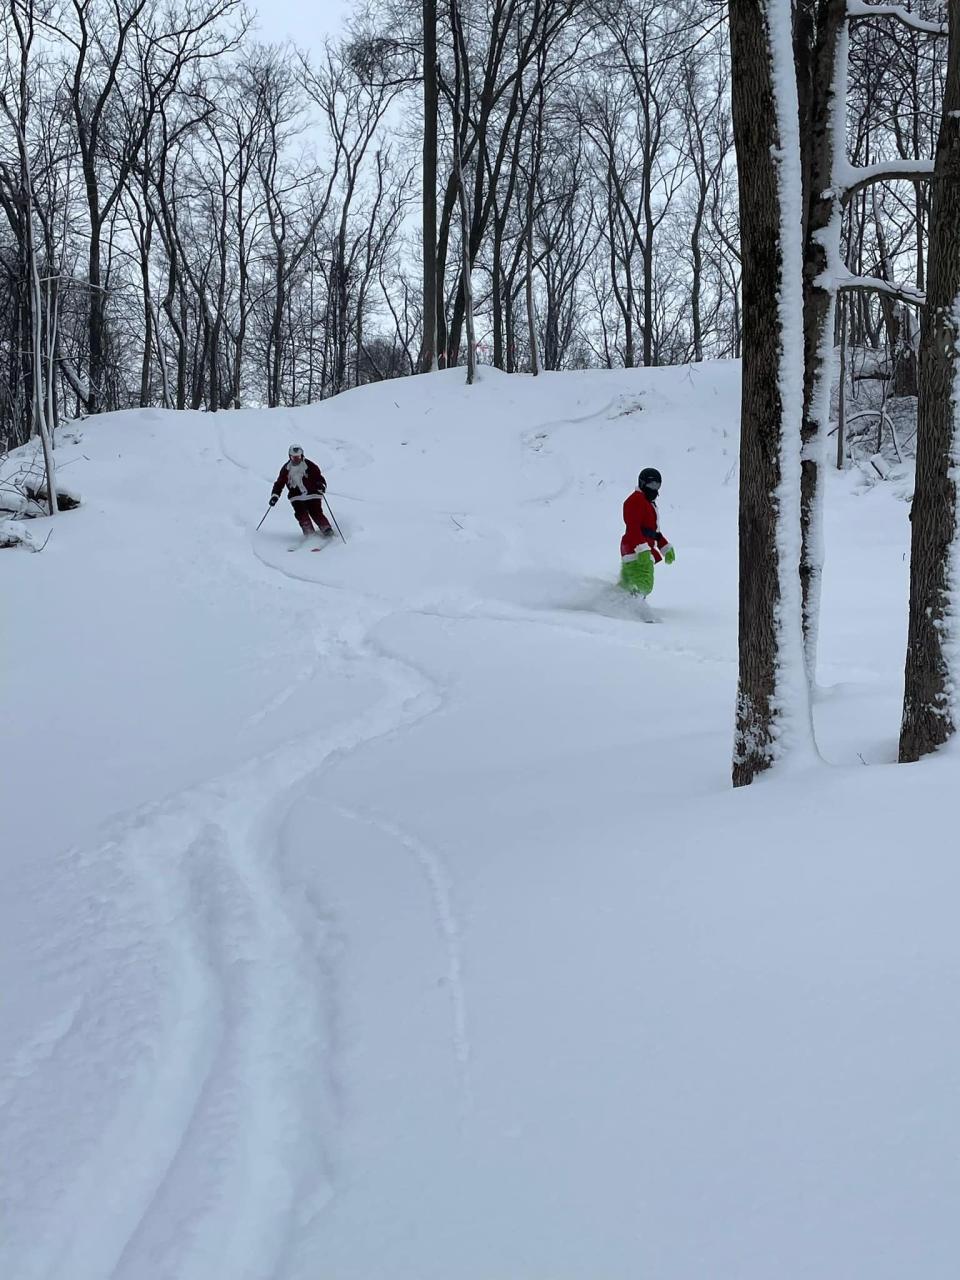 Skiers try the new Weezy's Way black diamond run at Swiss Valley Ski & Snowboard Area in Jones in late December's natural snow.